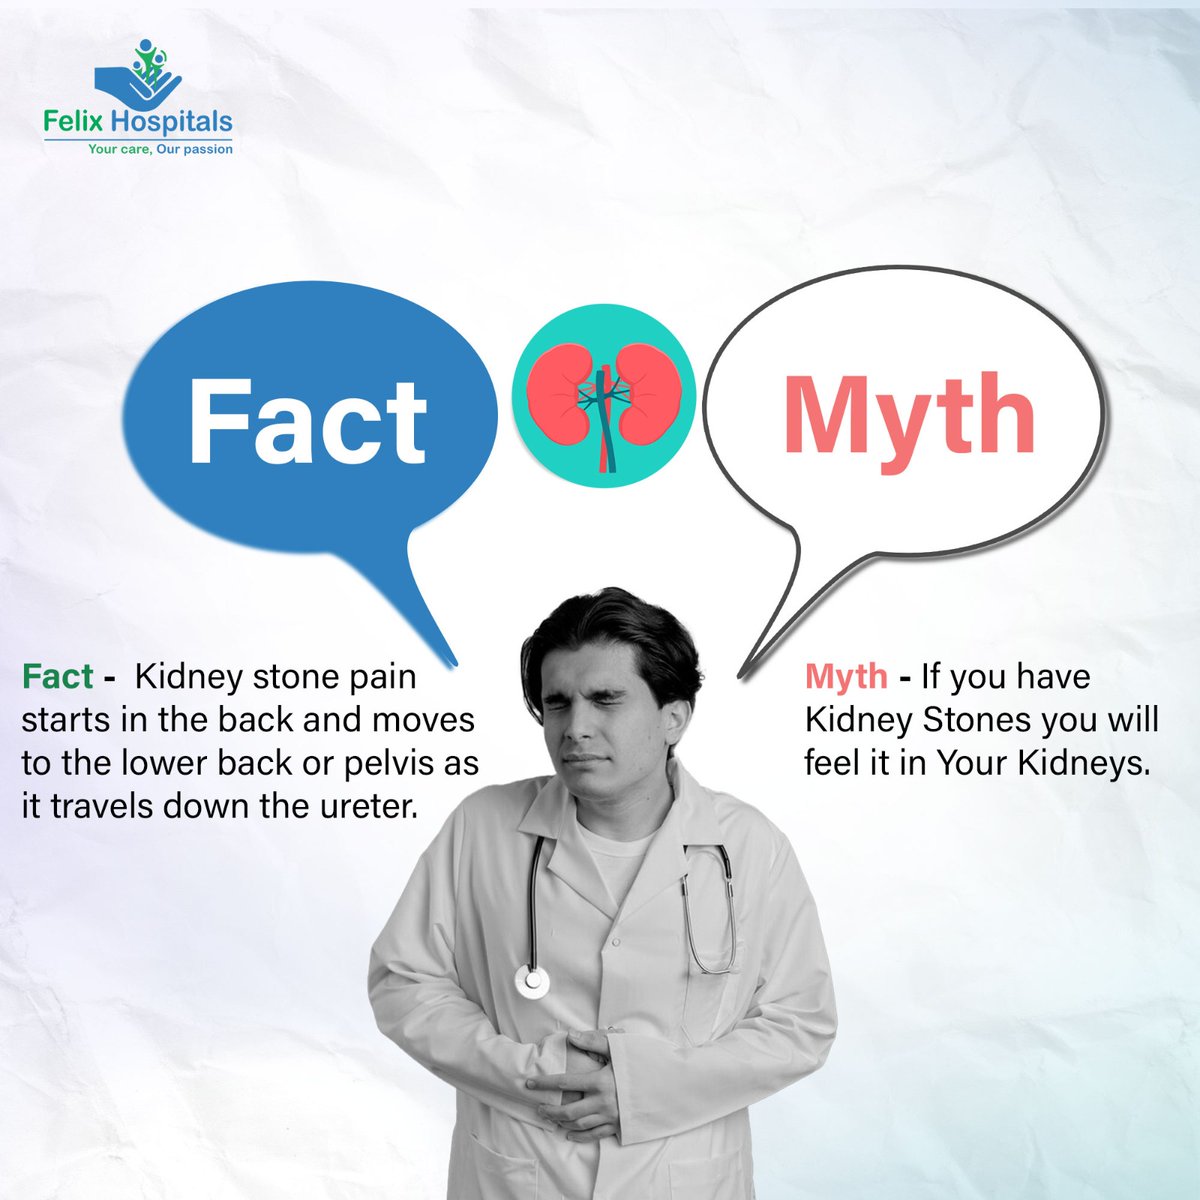 Kidney stone pain starts in your back and can spread. It's not just in your kidneys. Understanding this helps recognize symptoms accurately. #kidneycancer #myth #Kidneyfailure #mythandfact #kidneyhealth #facts #kidneydisease #factsyoudidntknow #letsgo #besthospitalinnoida